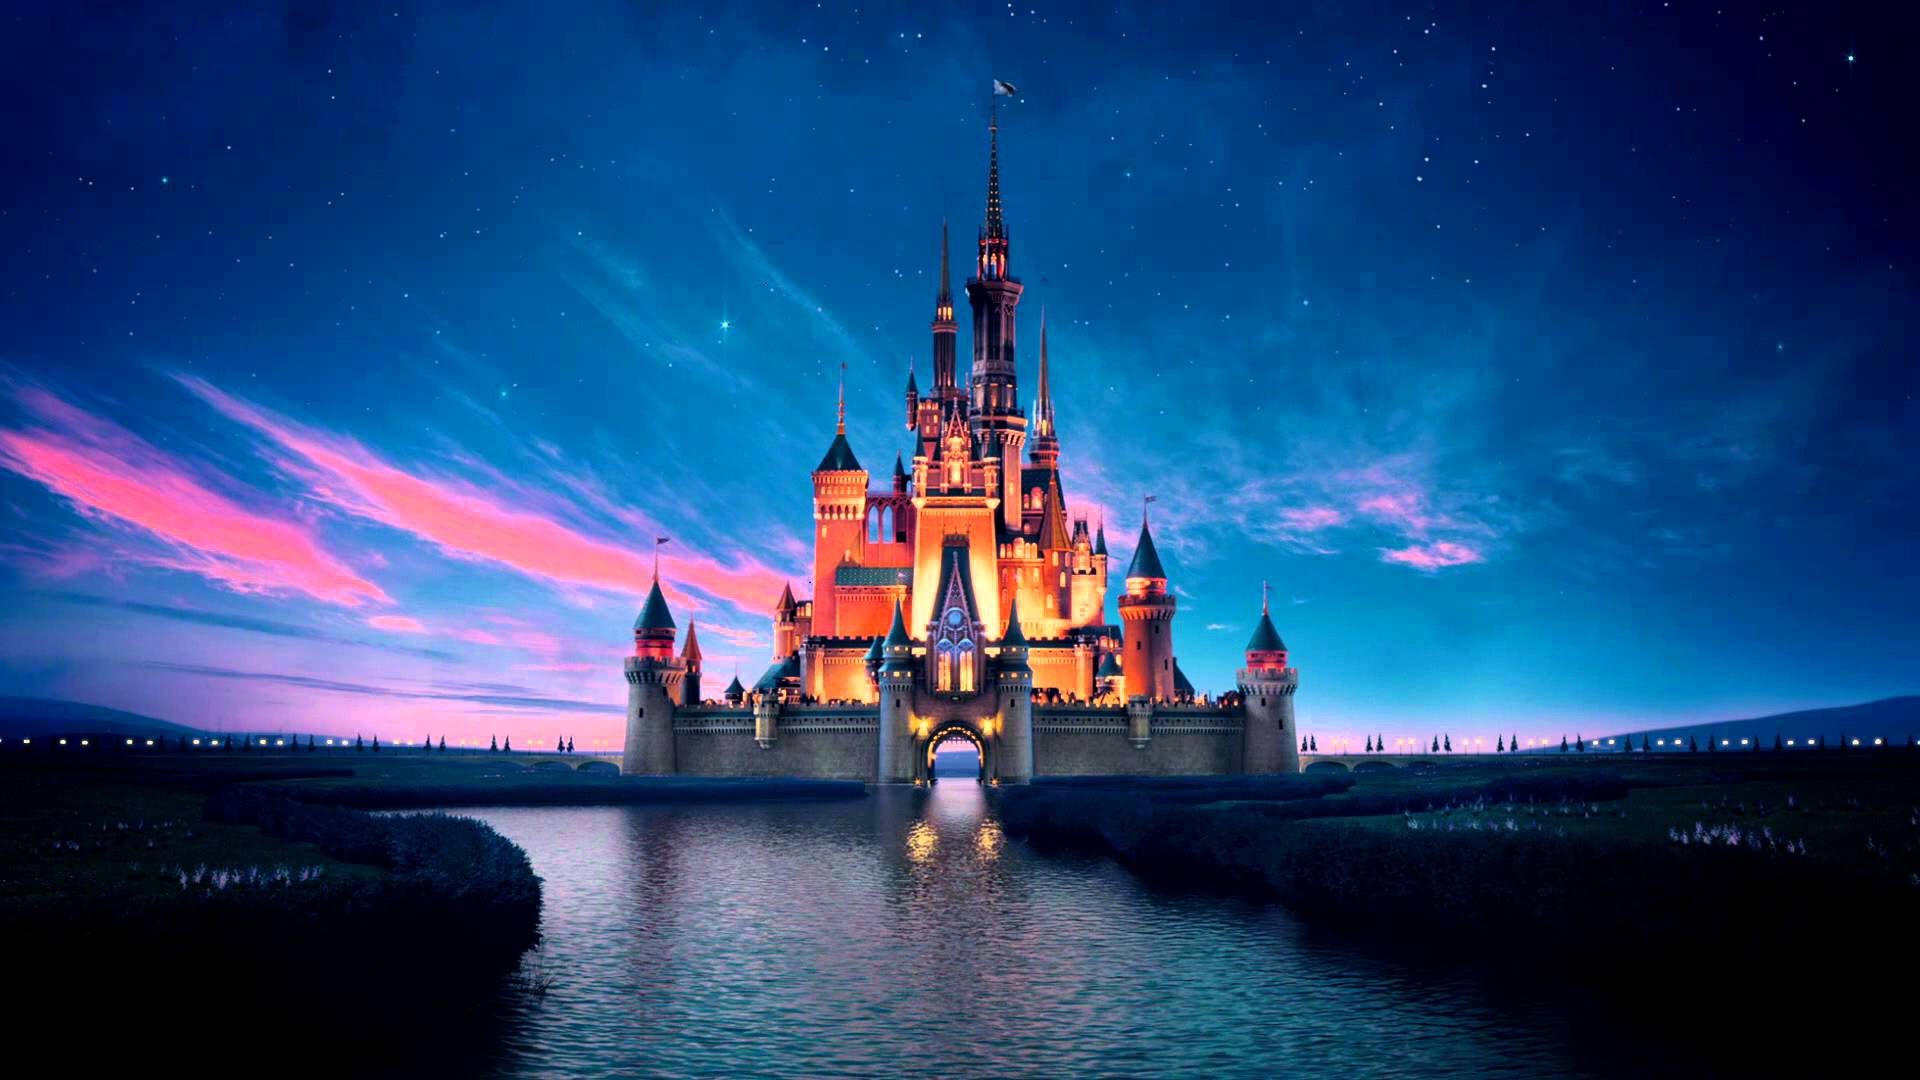 Awesome Disney Castle Wallpaper High Quality Widescreen Background